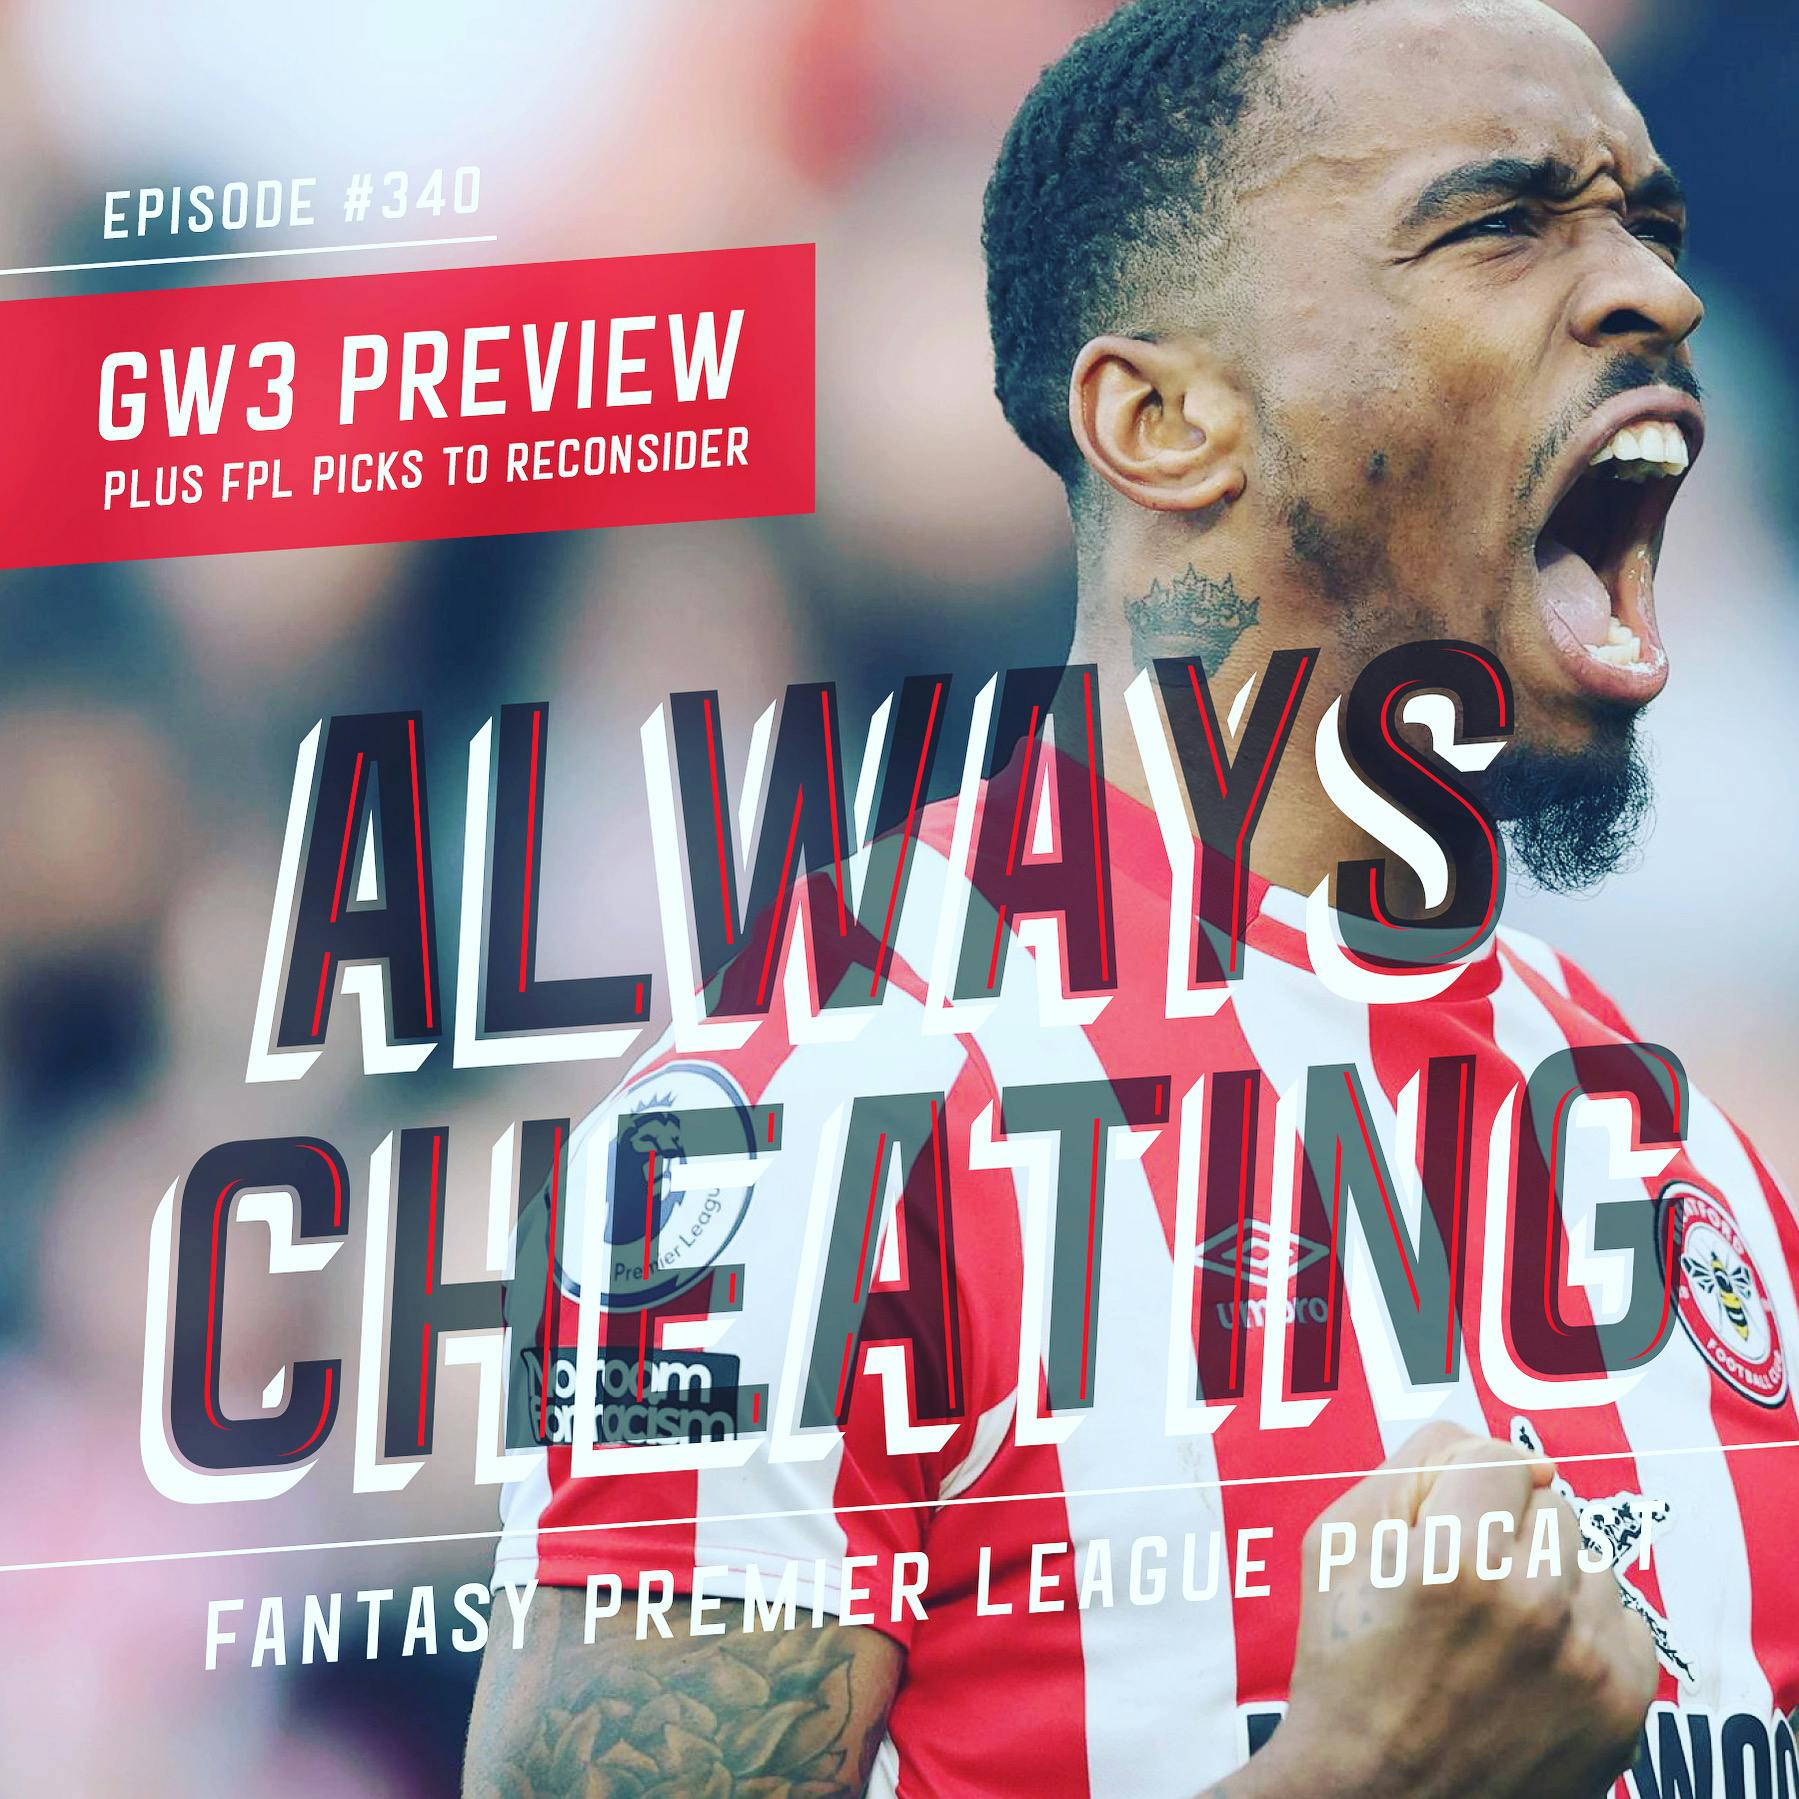 FPL Picks to Reconsider & GW3 Preview